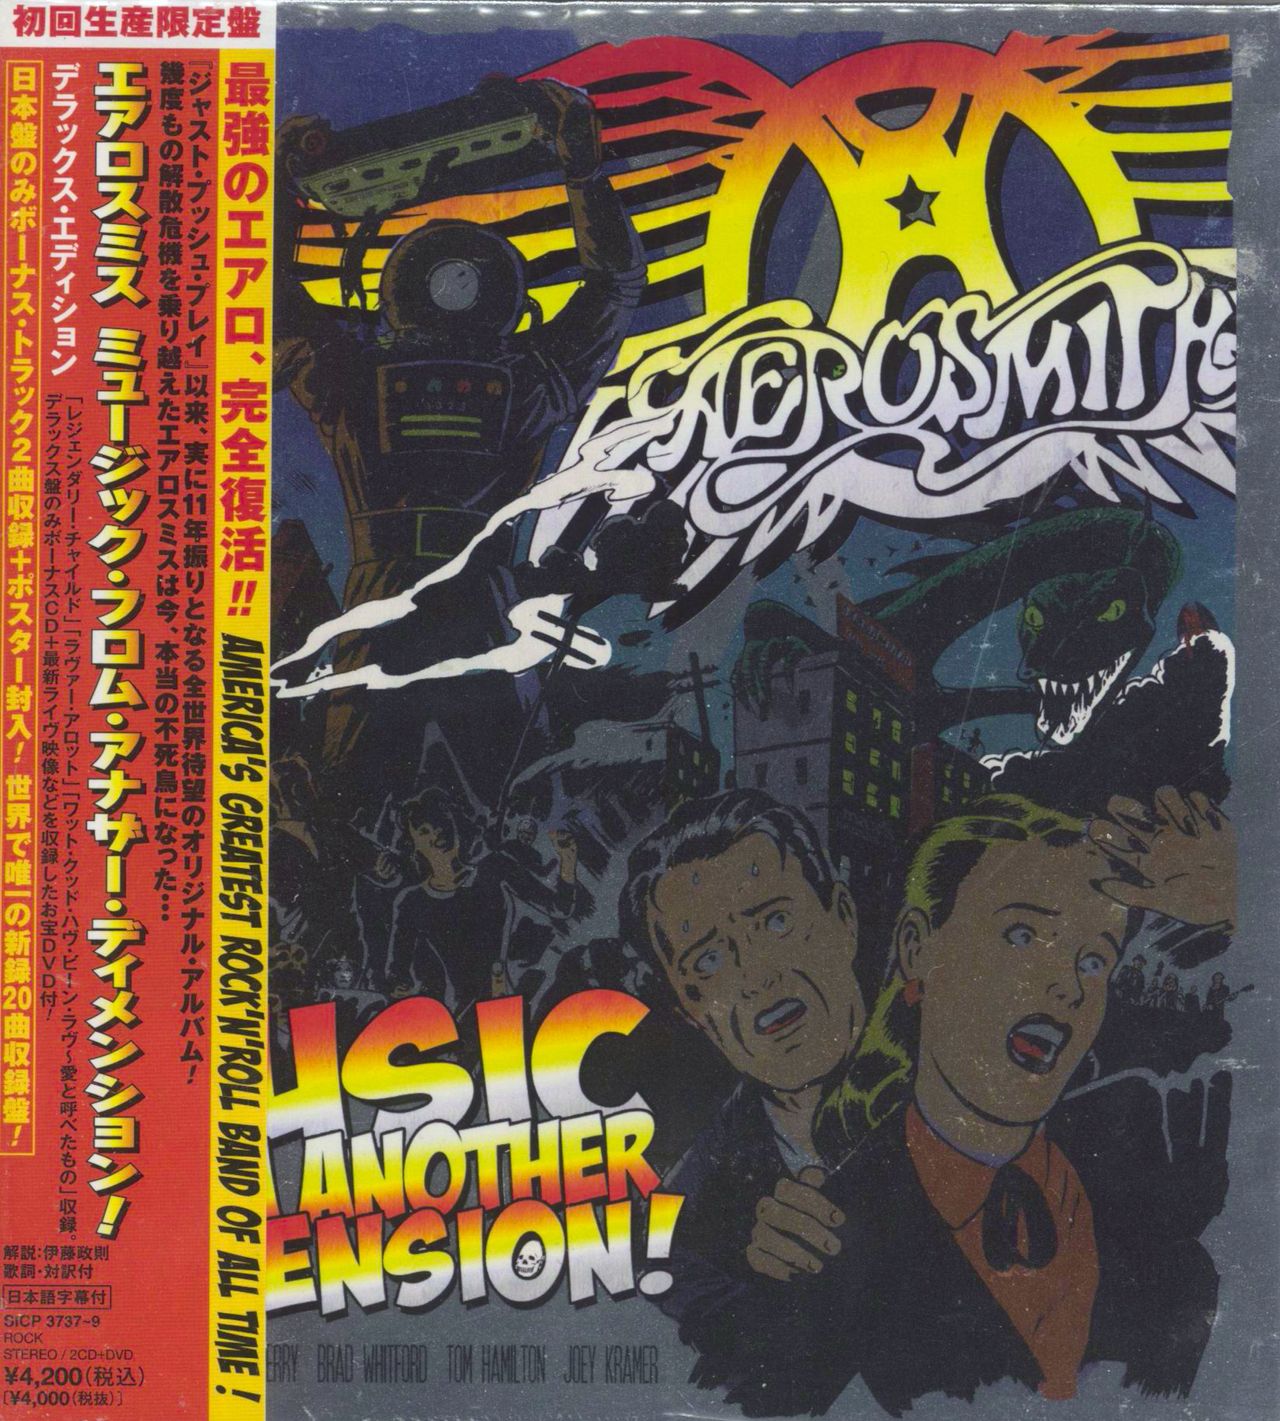 Aerosmith Music From Another Dimension! - Deluxe Edition Japanese